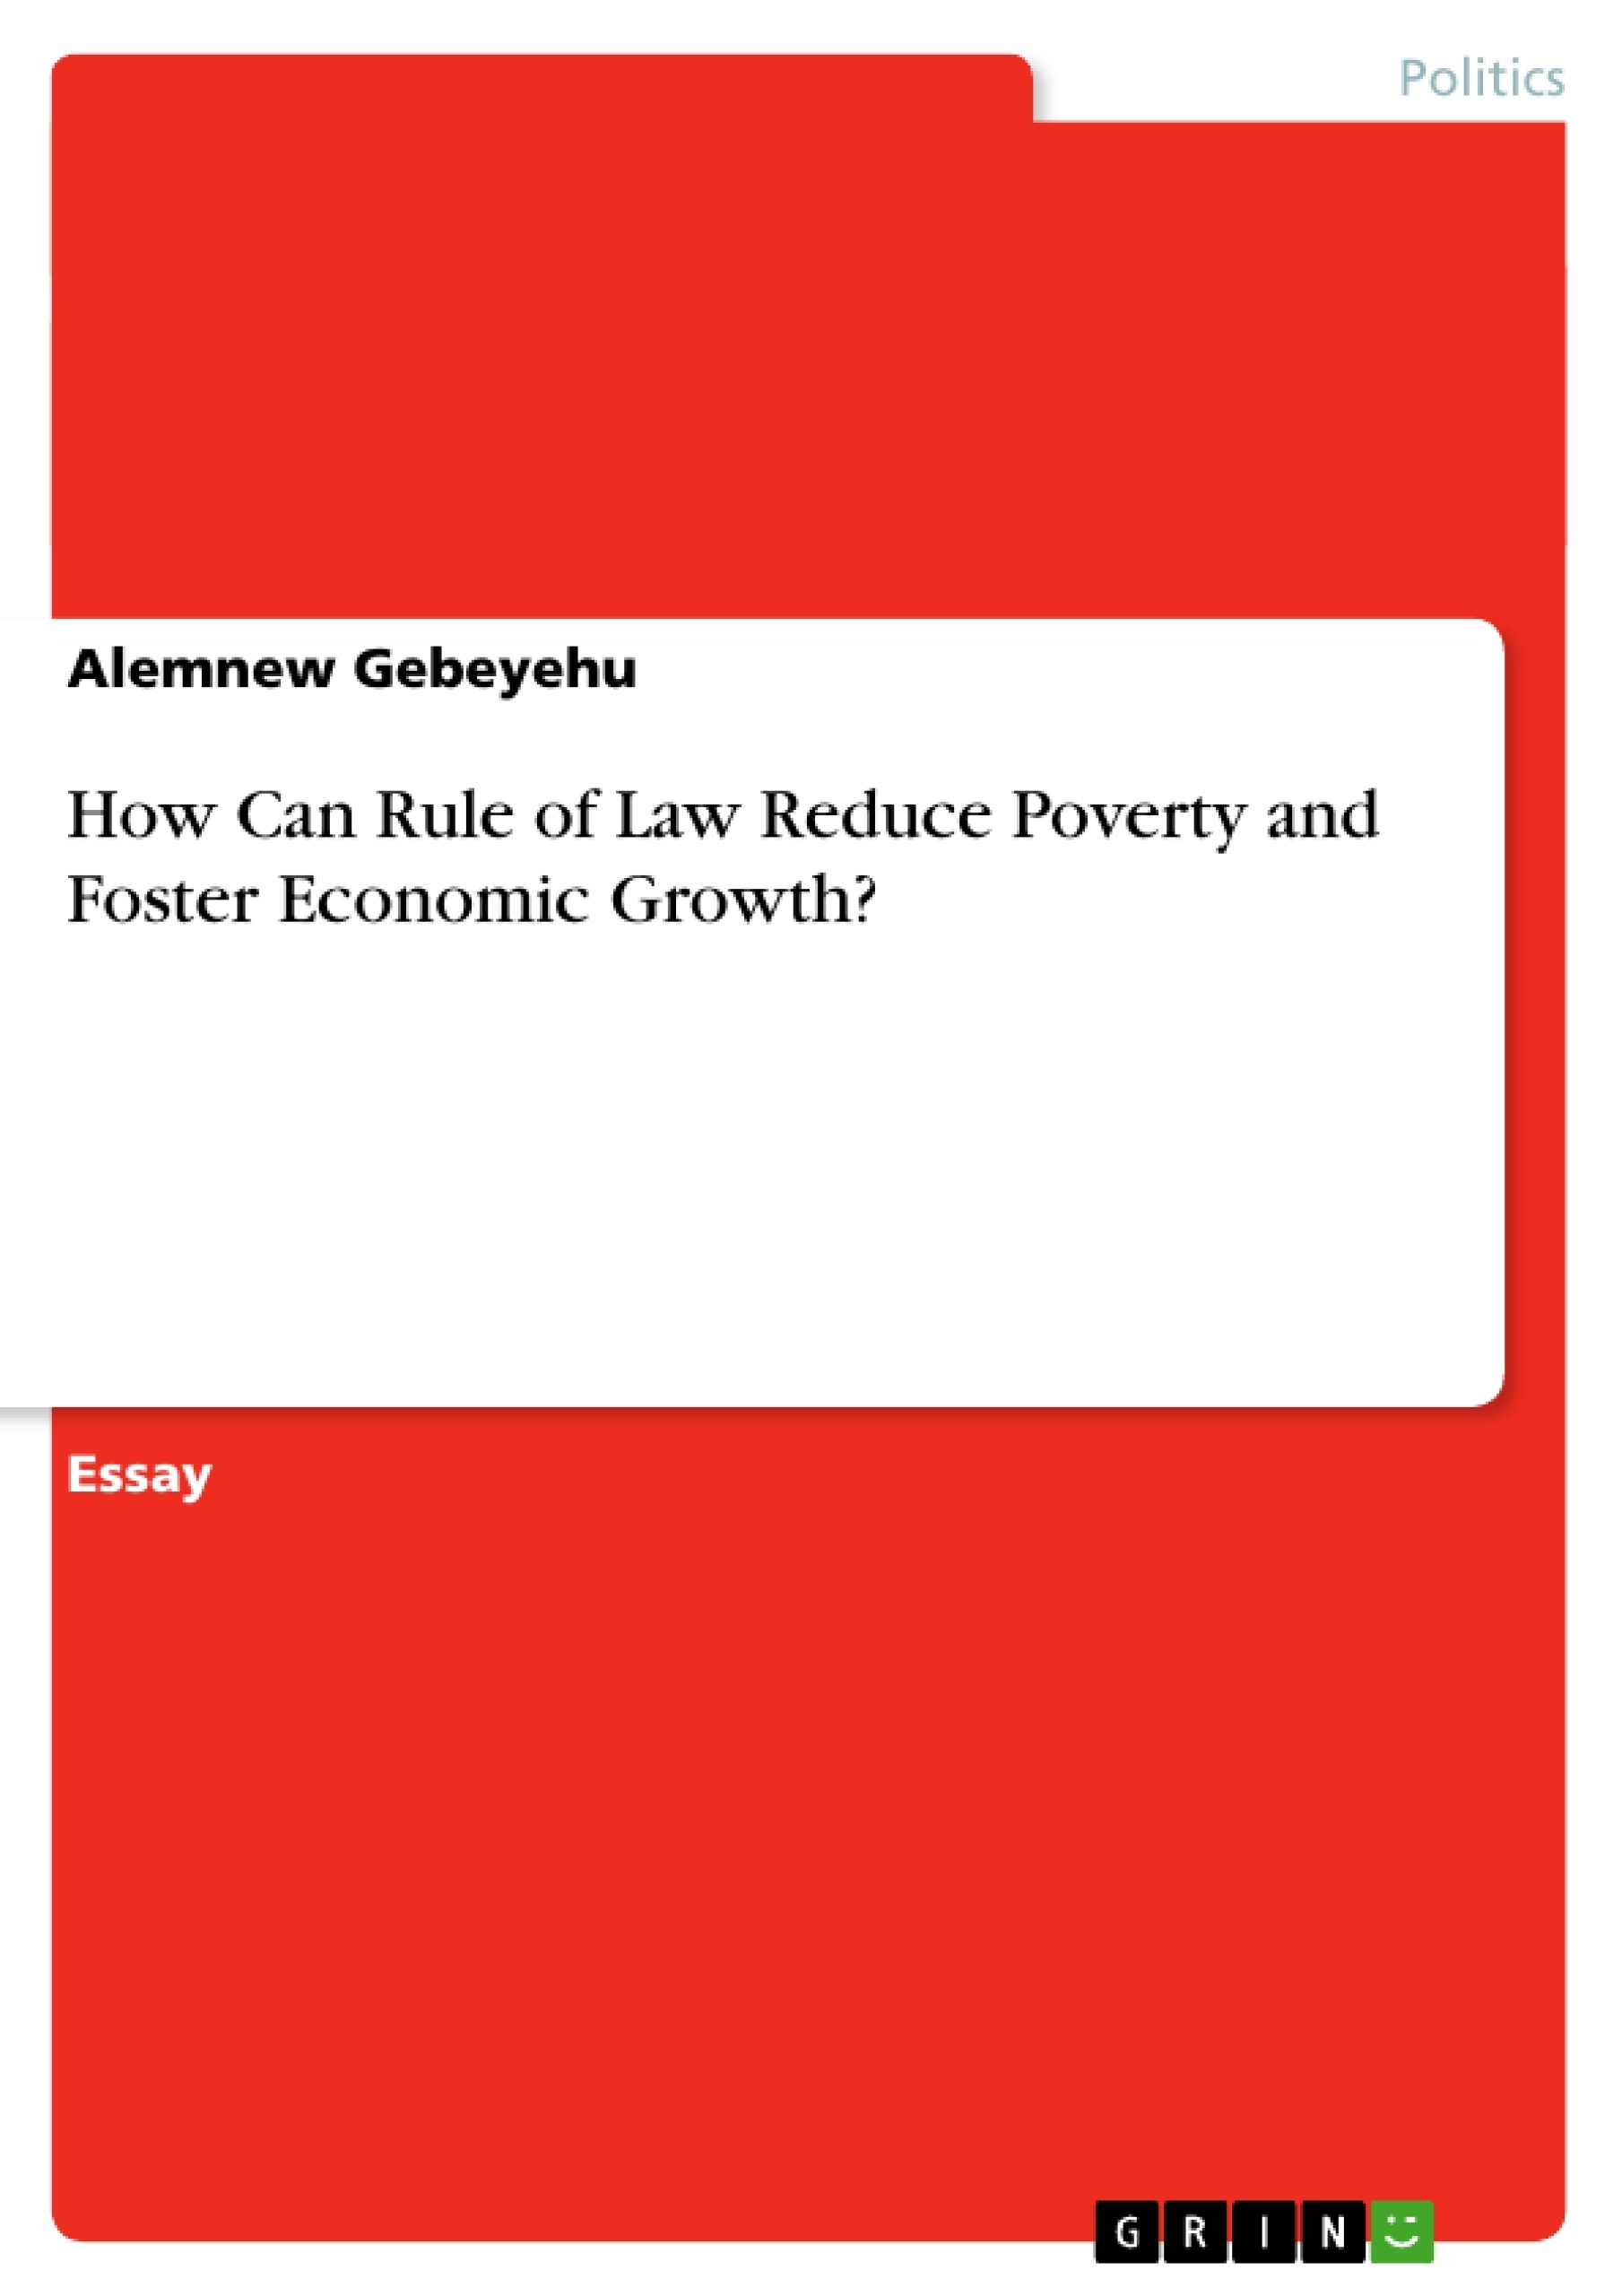 Titre: How Can Rule of Law Reduce Poverty and Foster Economic Growth?